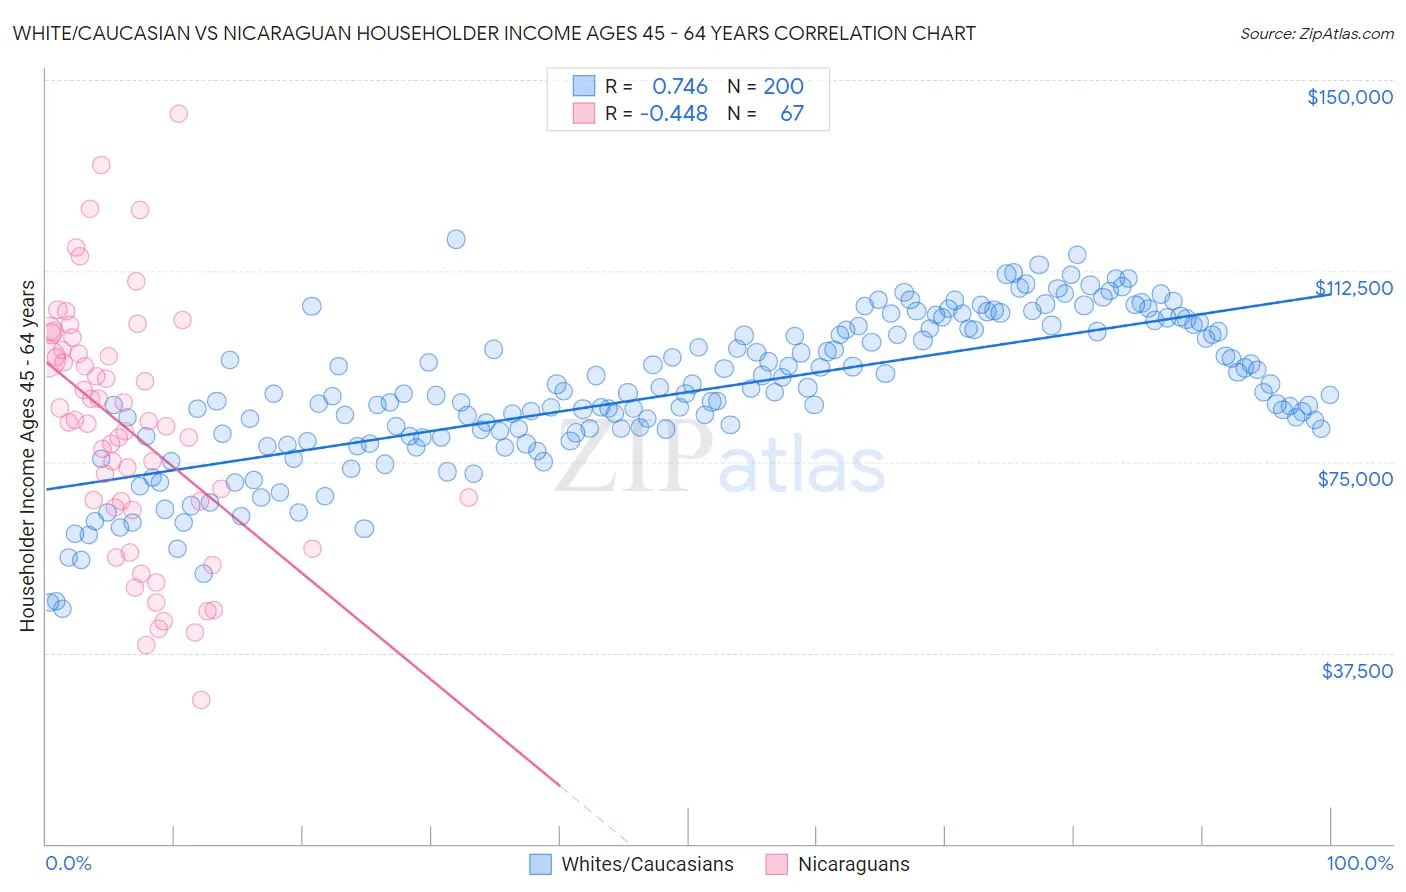 White/Caucasian vs Nicaraguan Householder Income Ages 45 - 64 years